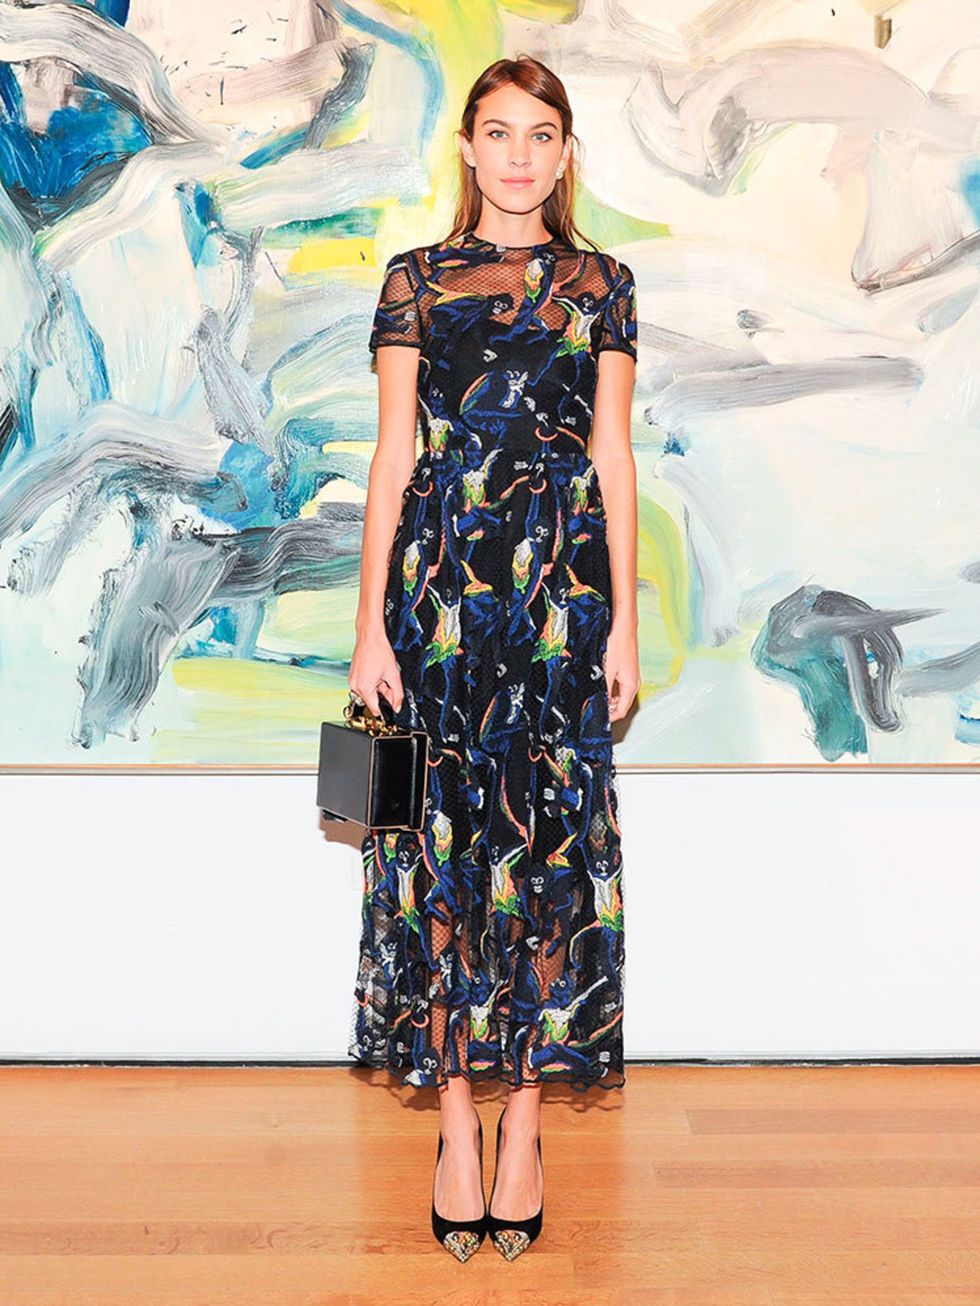 <p><a href="http://www.elleuk.com/fashion/celebrity-style/alexa-chung-s-style-file">Alexa Chung</a> in <a href="http://www.elleuk.com/catwalk/valentino/spring-summer-2015">Valentino</a>.</p>

<p>Picture: Rex</p>